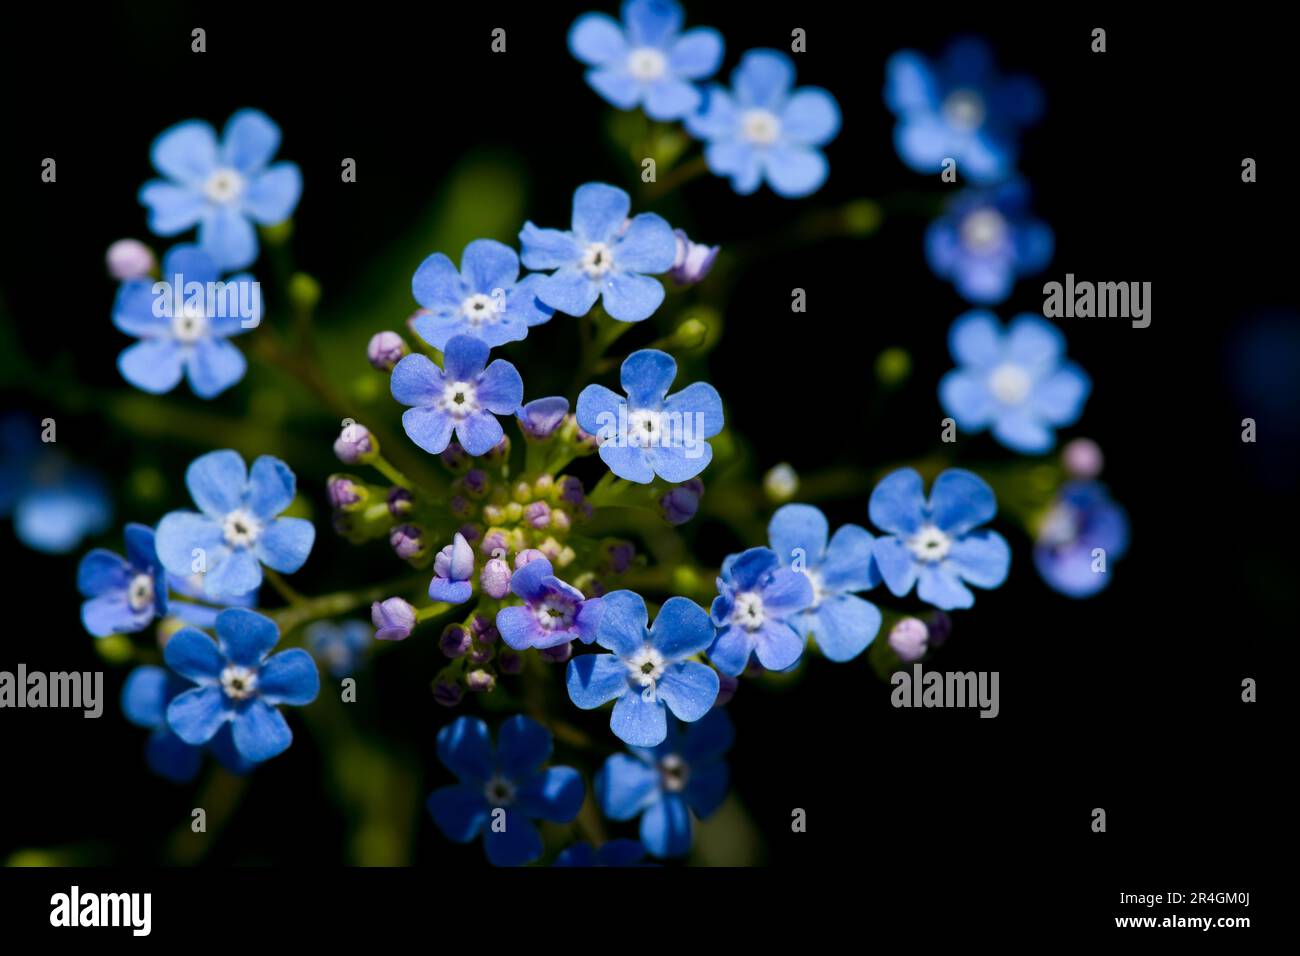 forget-me-knot, in colur and black and white Stock Photo